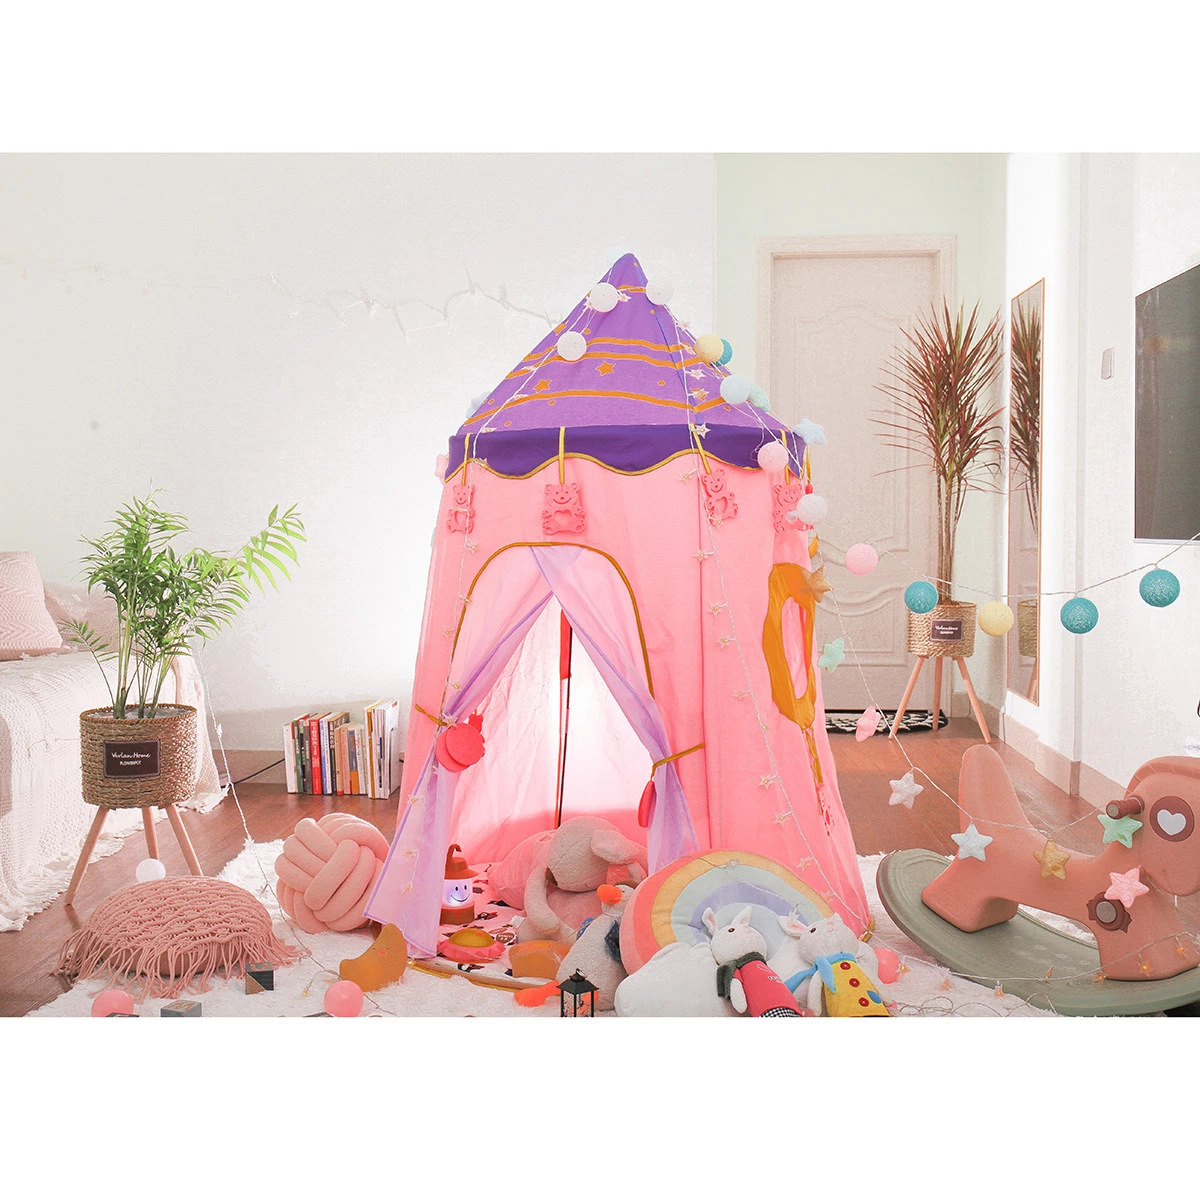 Kiddie Twinkle Star Tent Collapsible Children Pop-up Round Game Room Wbb16359